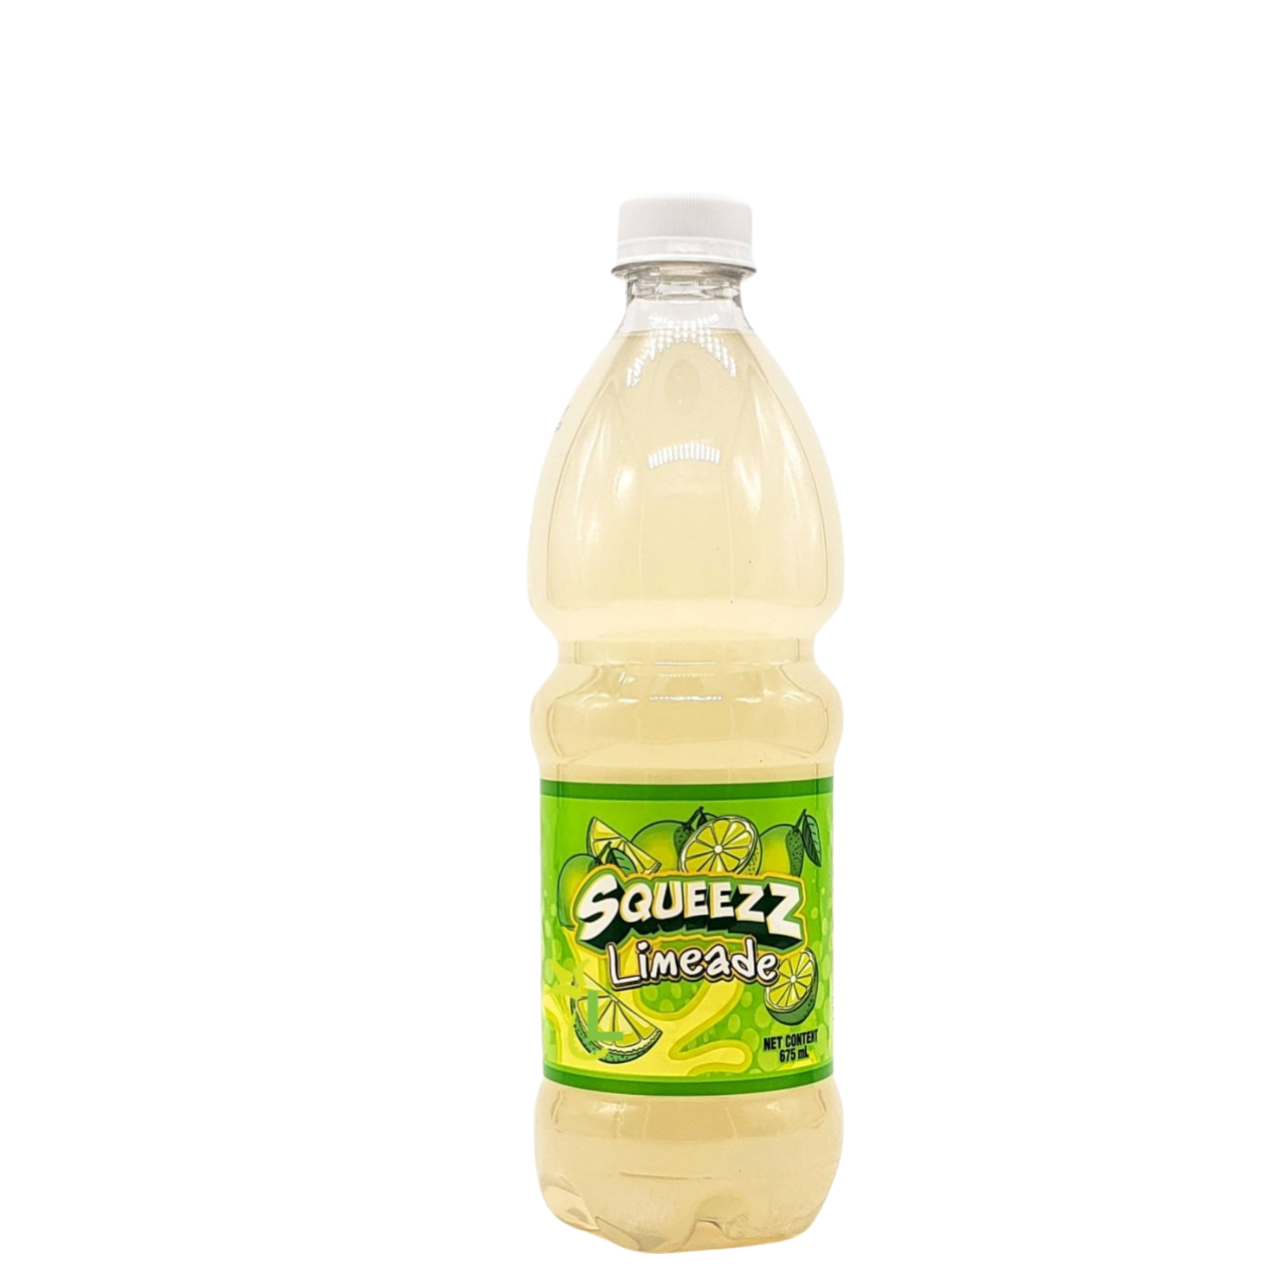 SQUEEZZ LIMEADE